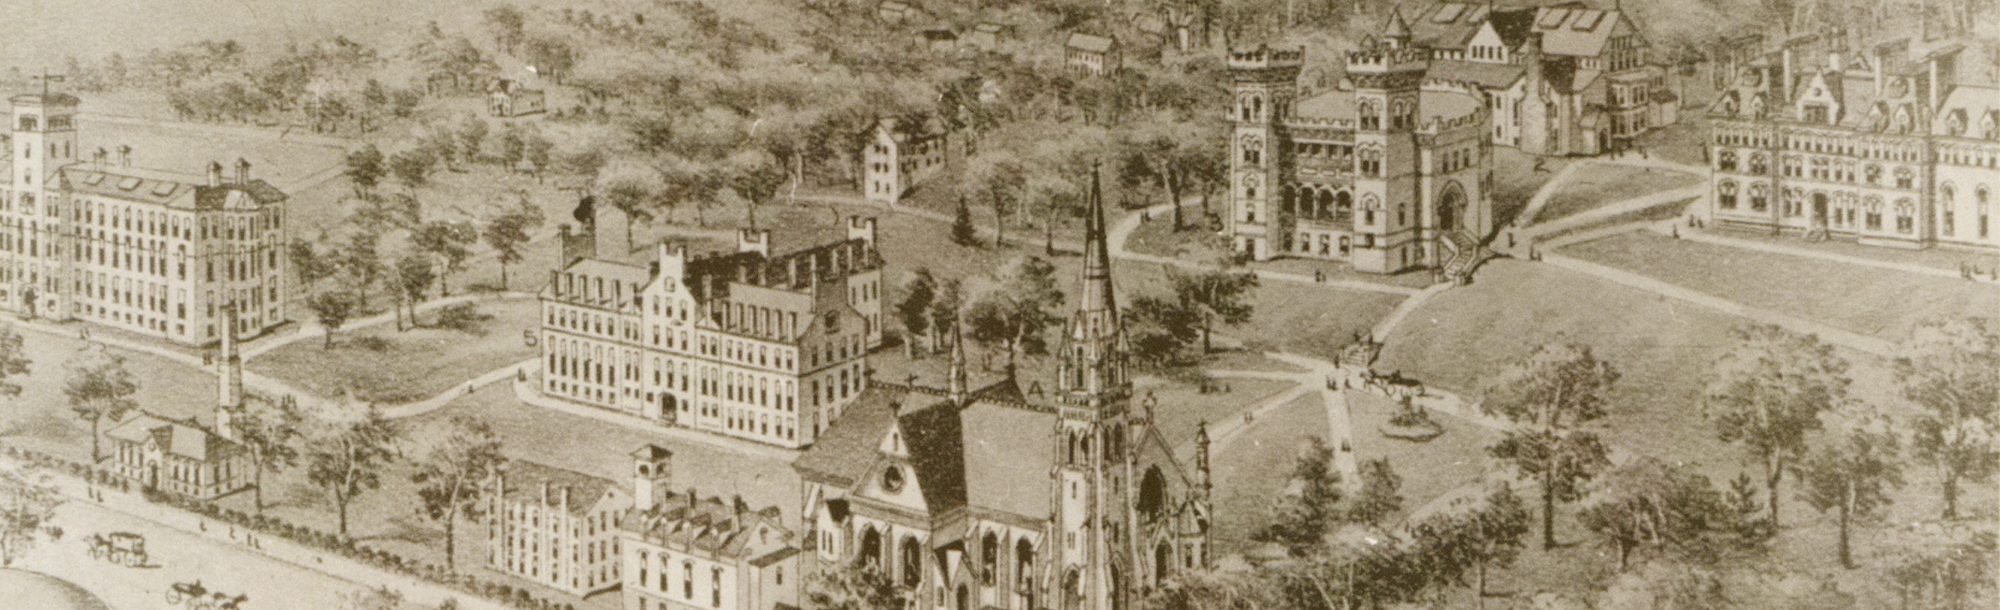 Sepia tone drawing of campus